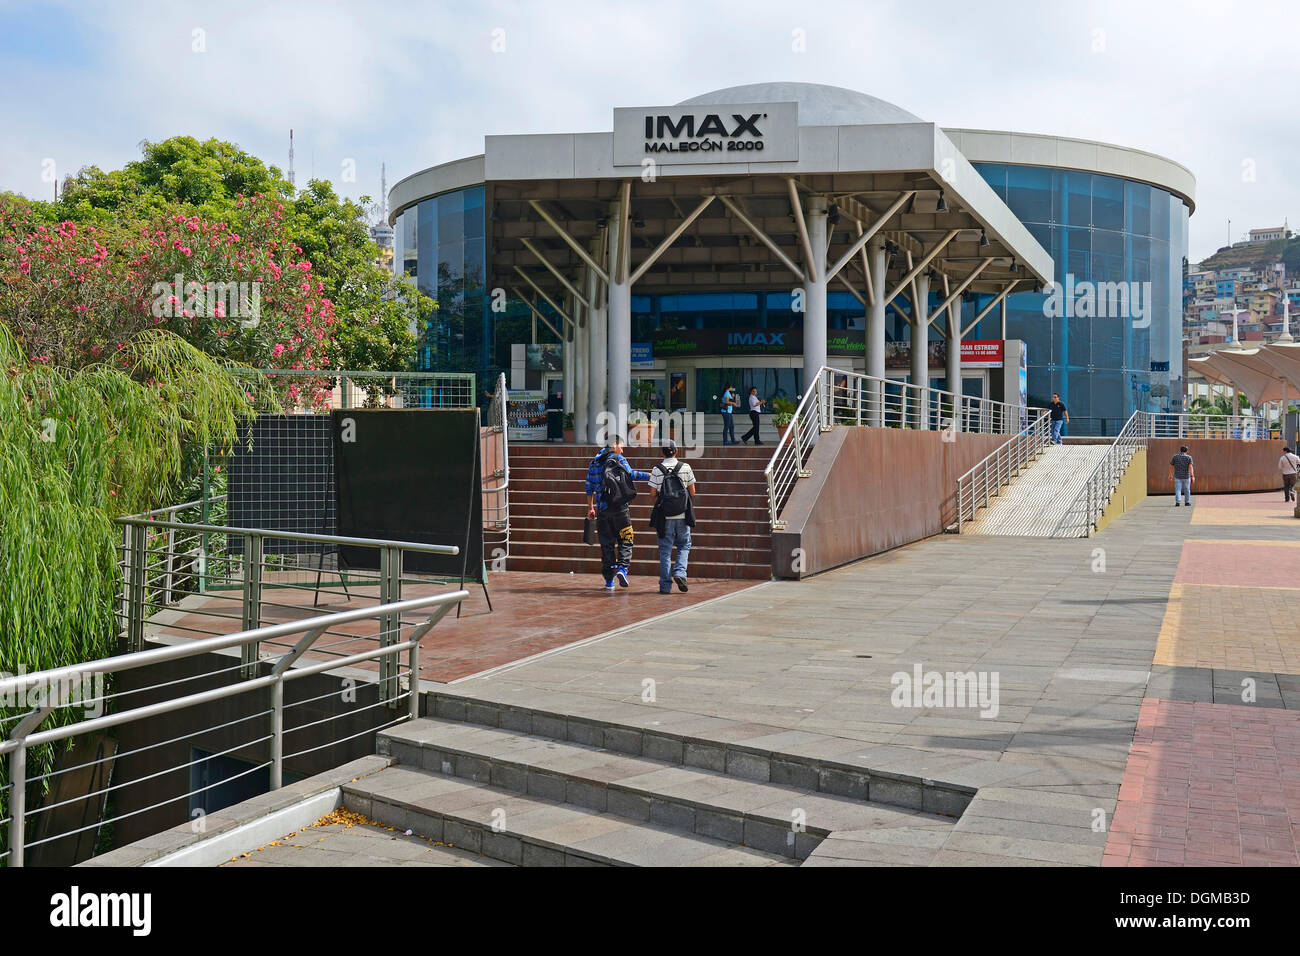 IMAX cinema on the waterfront of Park Malecon on the banks of Rio Guayas, Guayaquil, Ecuador, South America Stock Photo